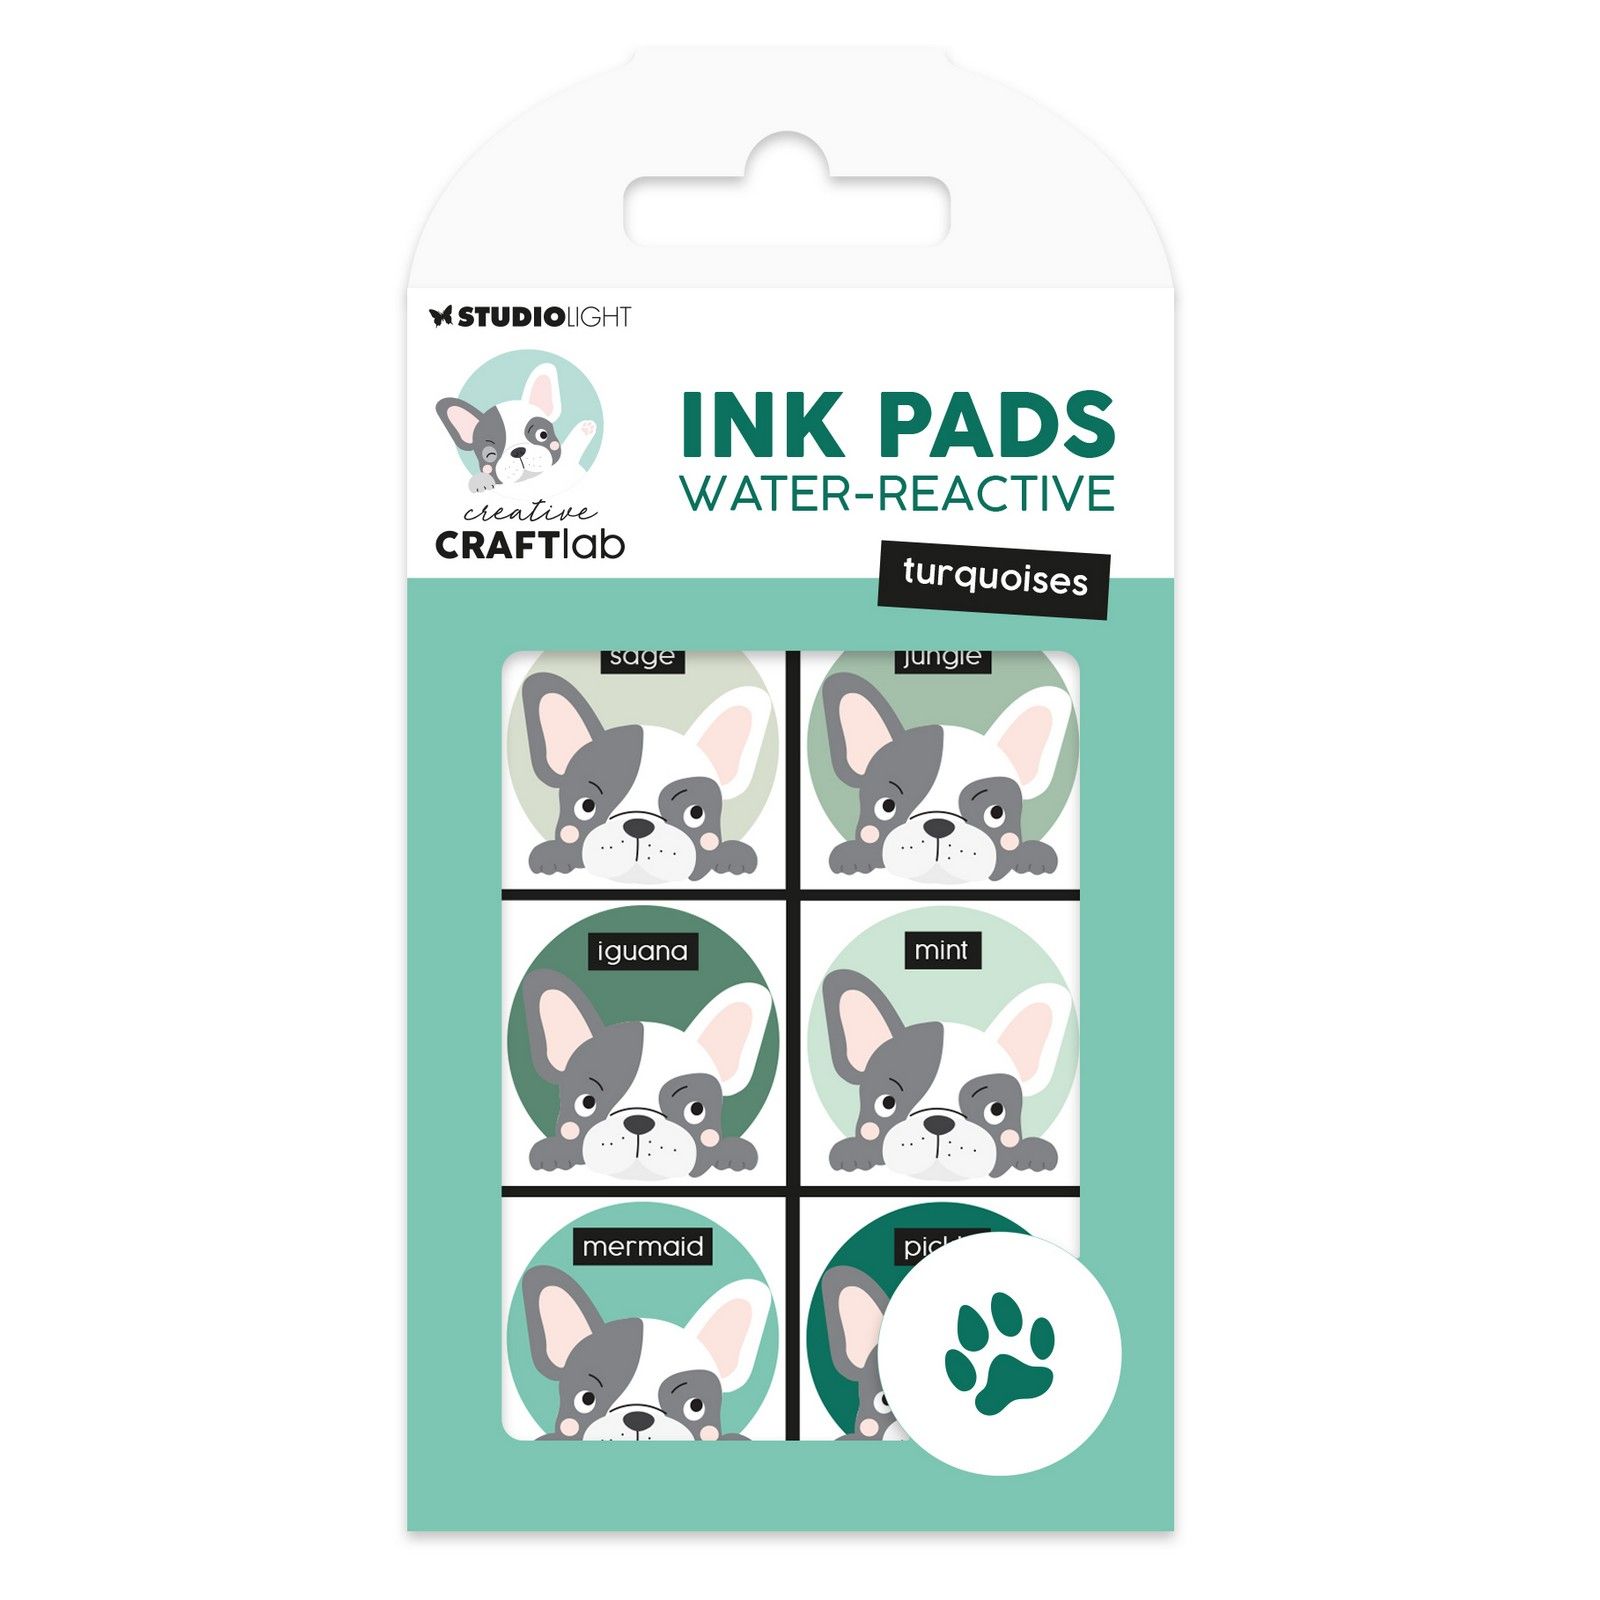 Creative Craftlab • Essentials Ink Pads Water-Reactive Turquoises